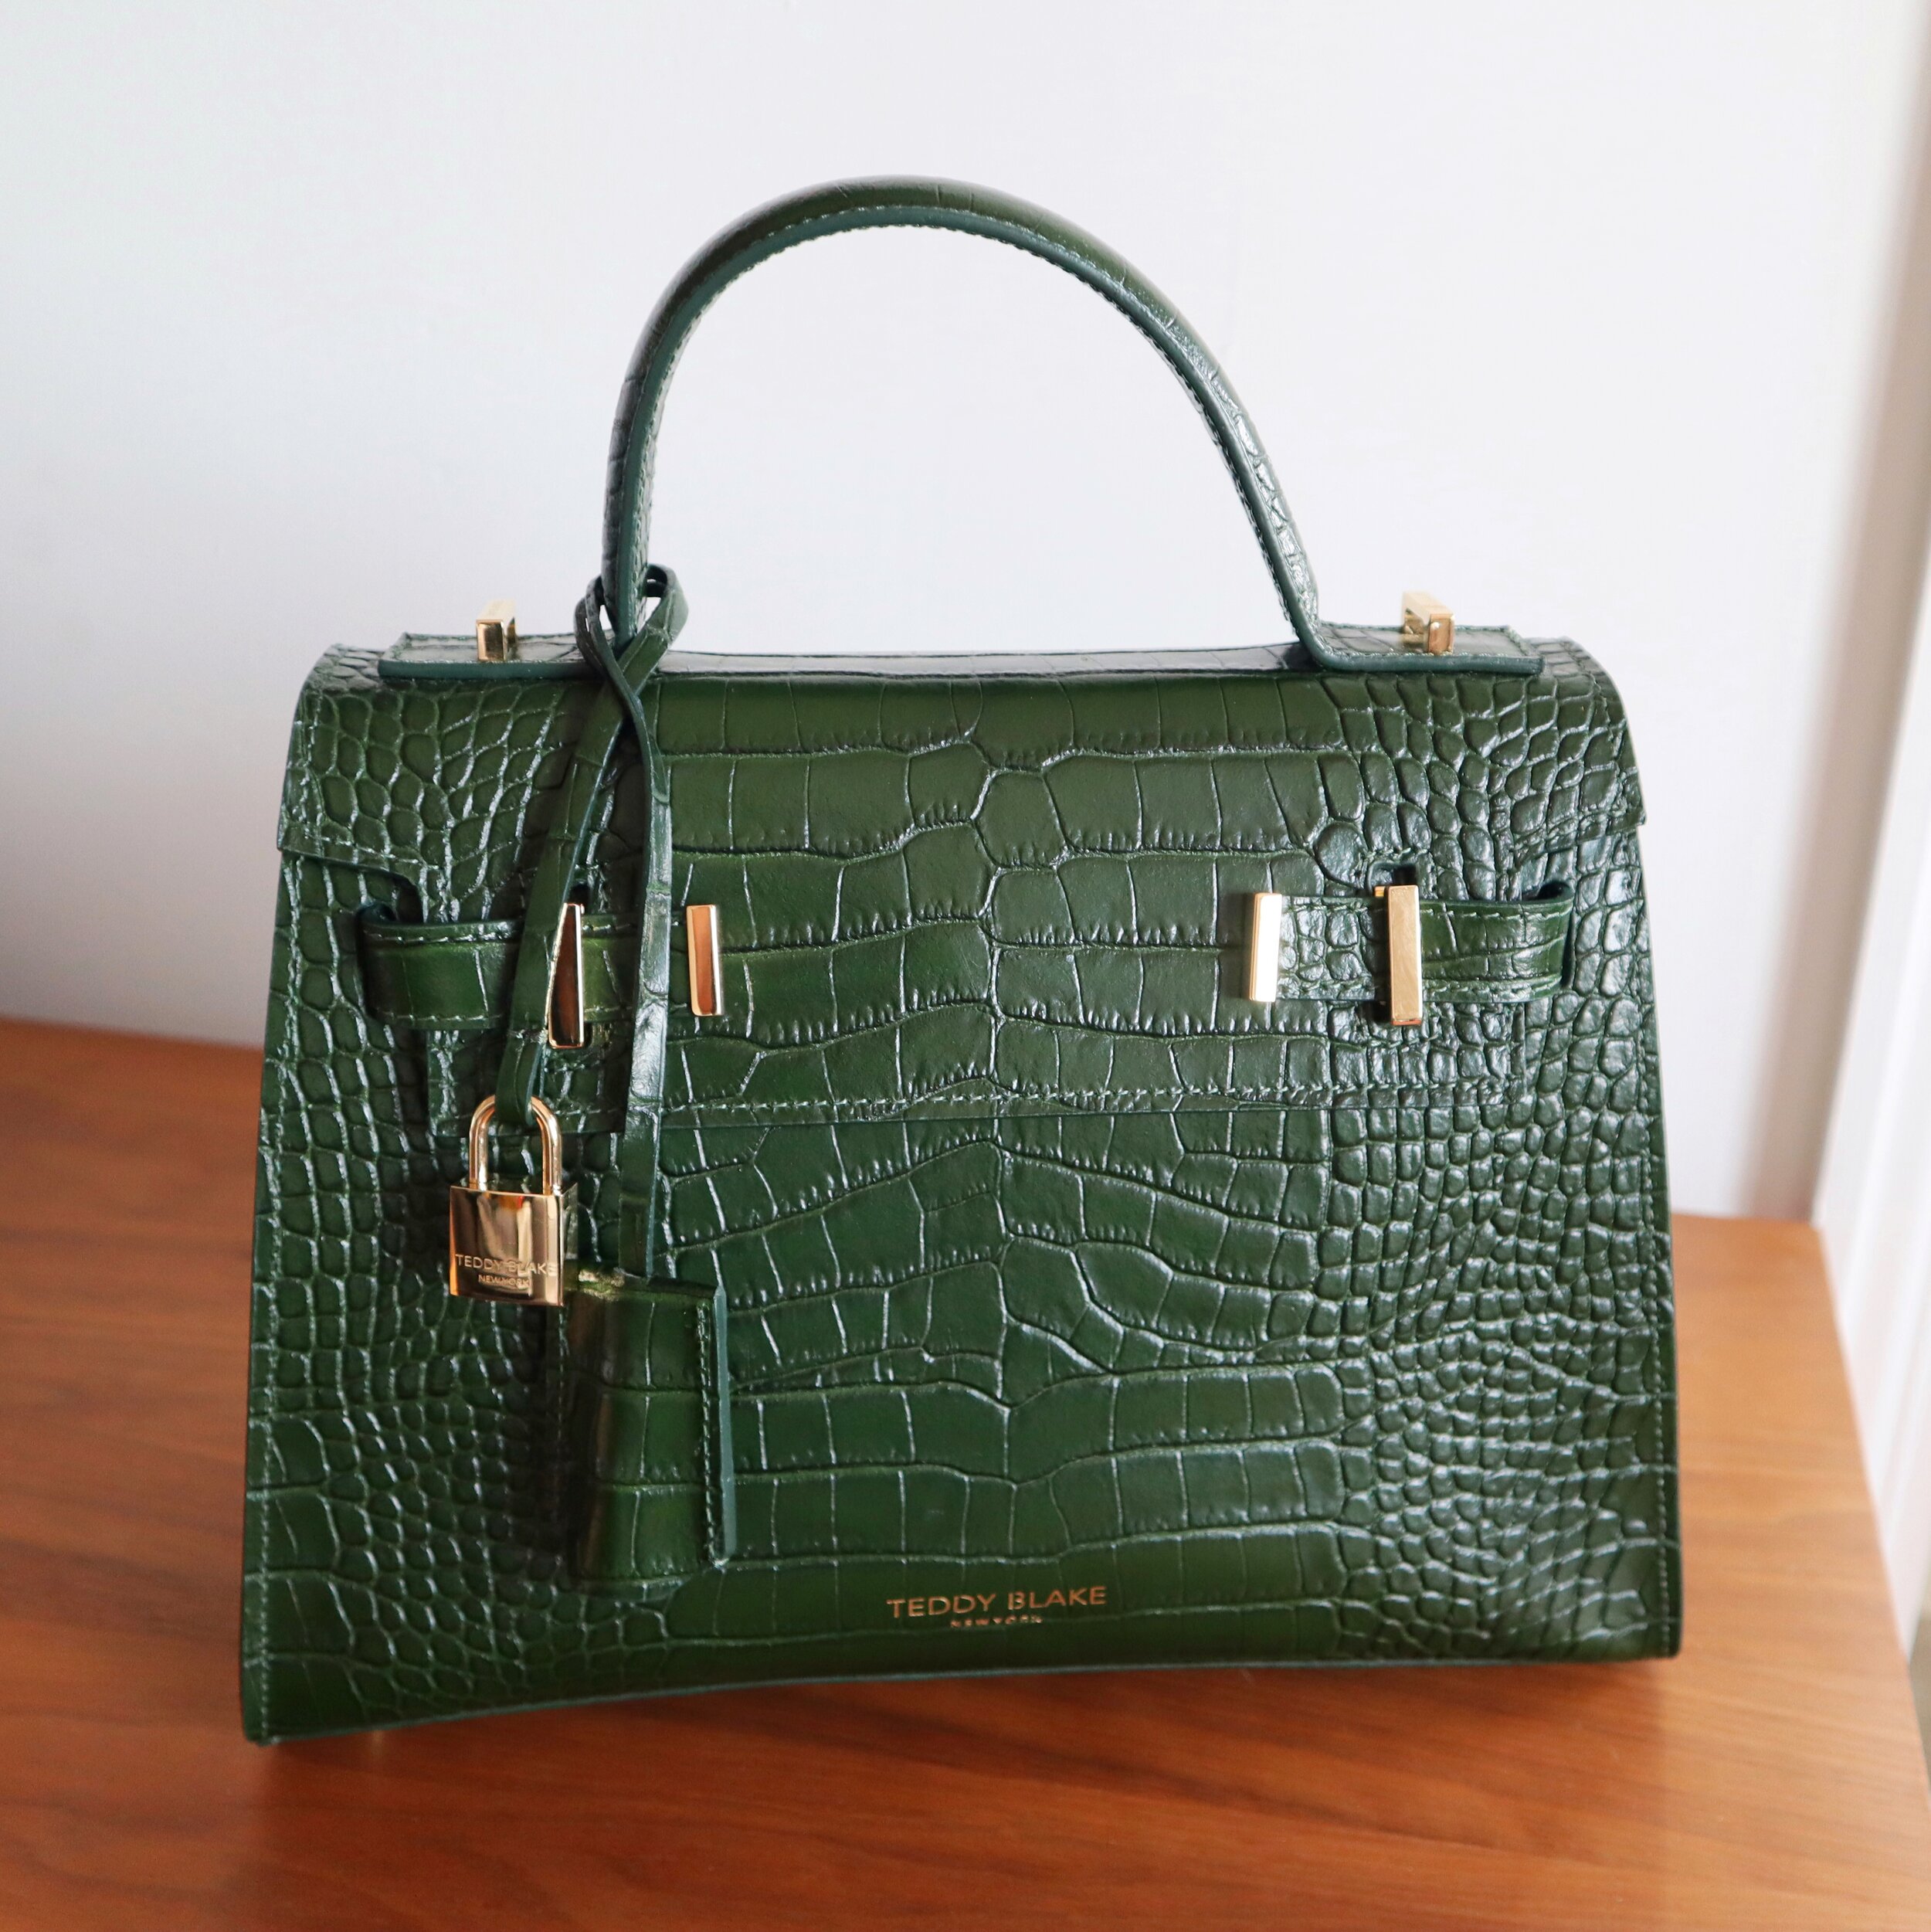 How to Determine Quality and Choose the Right Handbag